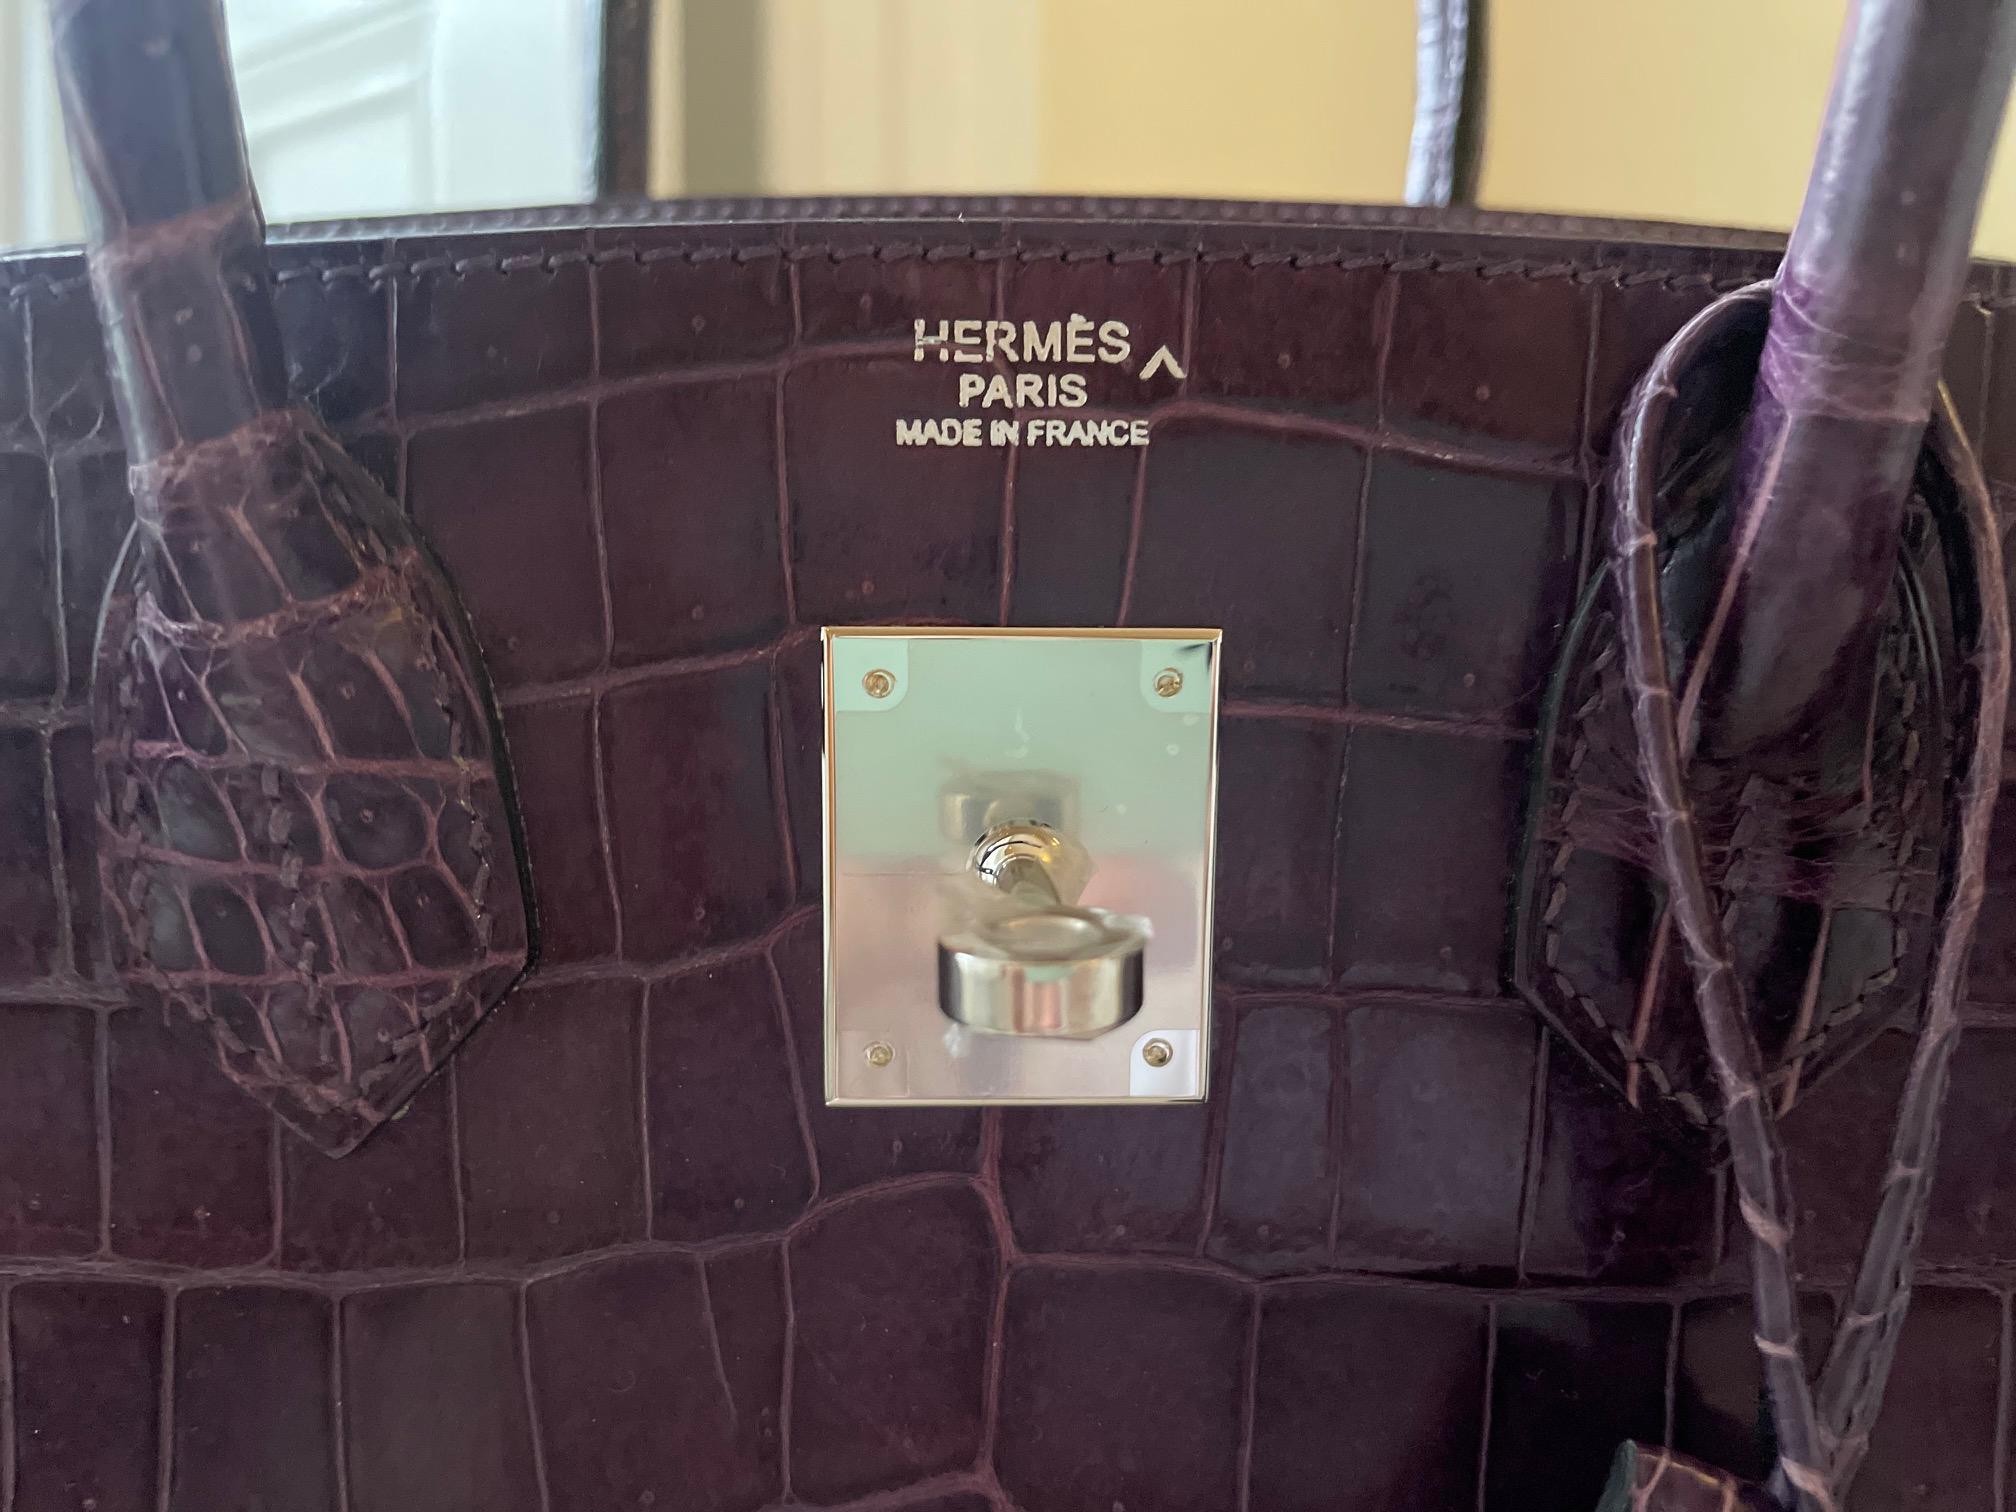 HERMÈS Violet Purple Porosus Crocodile PHW 30 Birkin Bag. Very good condition! 
This Birkin is a true timeless to add to your bag collection!